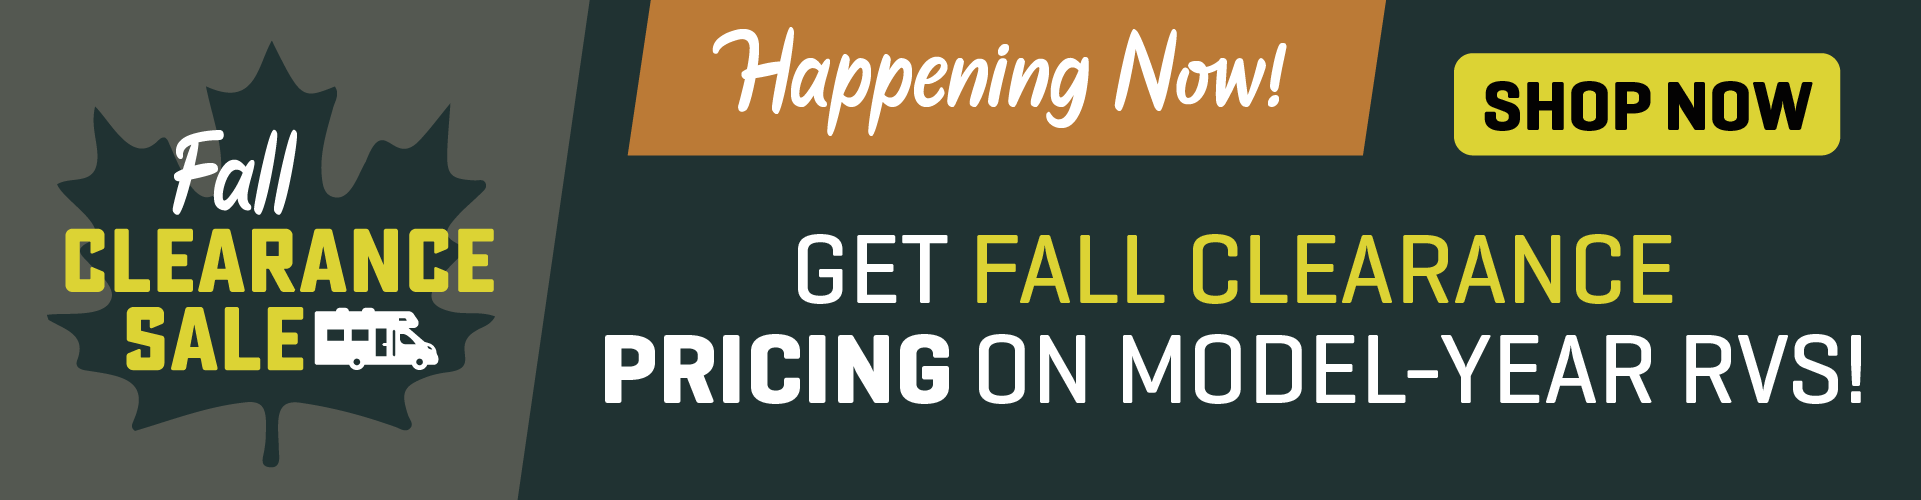 Get Fall Clearance Pricing on Model-Year RVs - Happening Now - Fall Clearance Sale